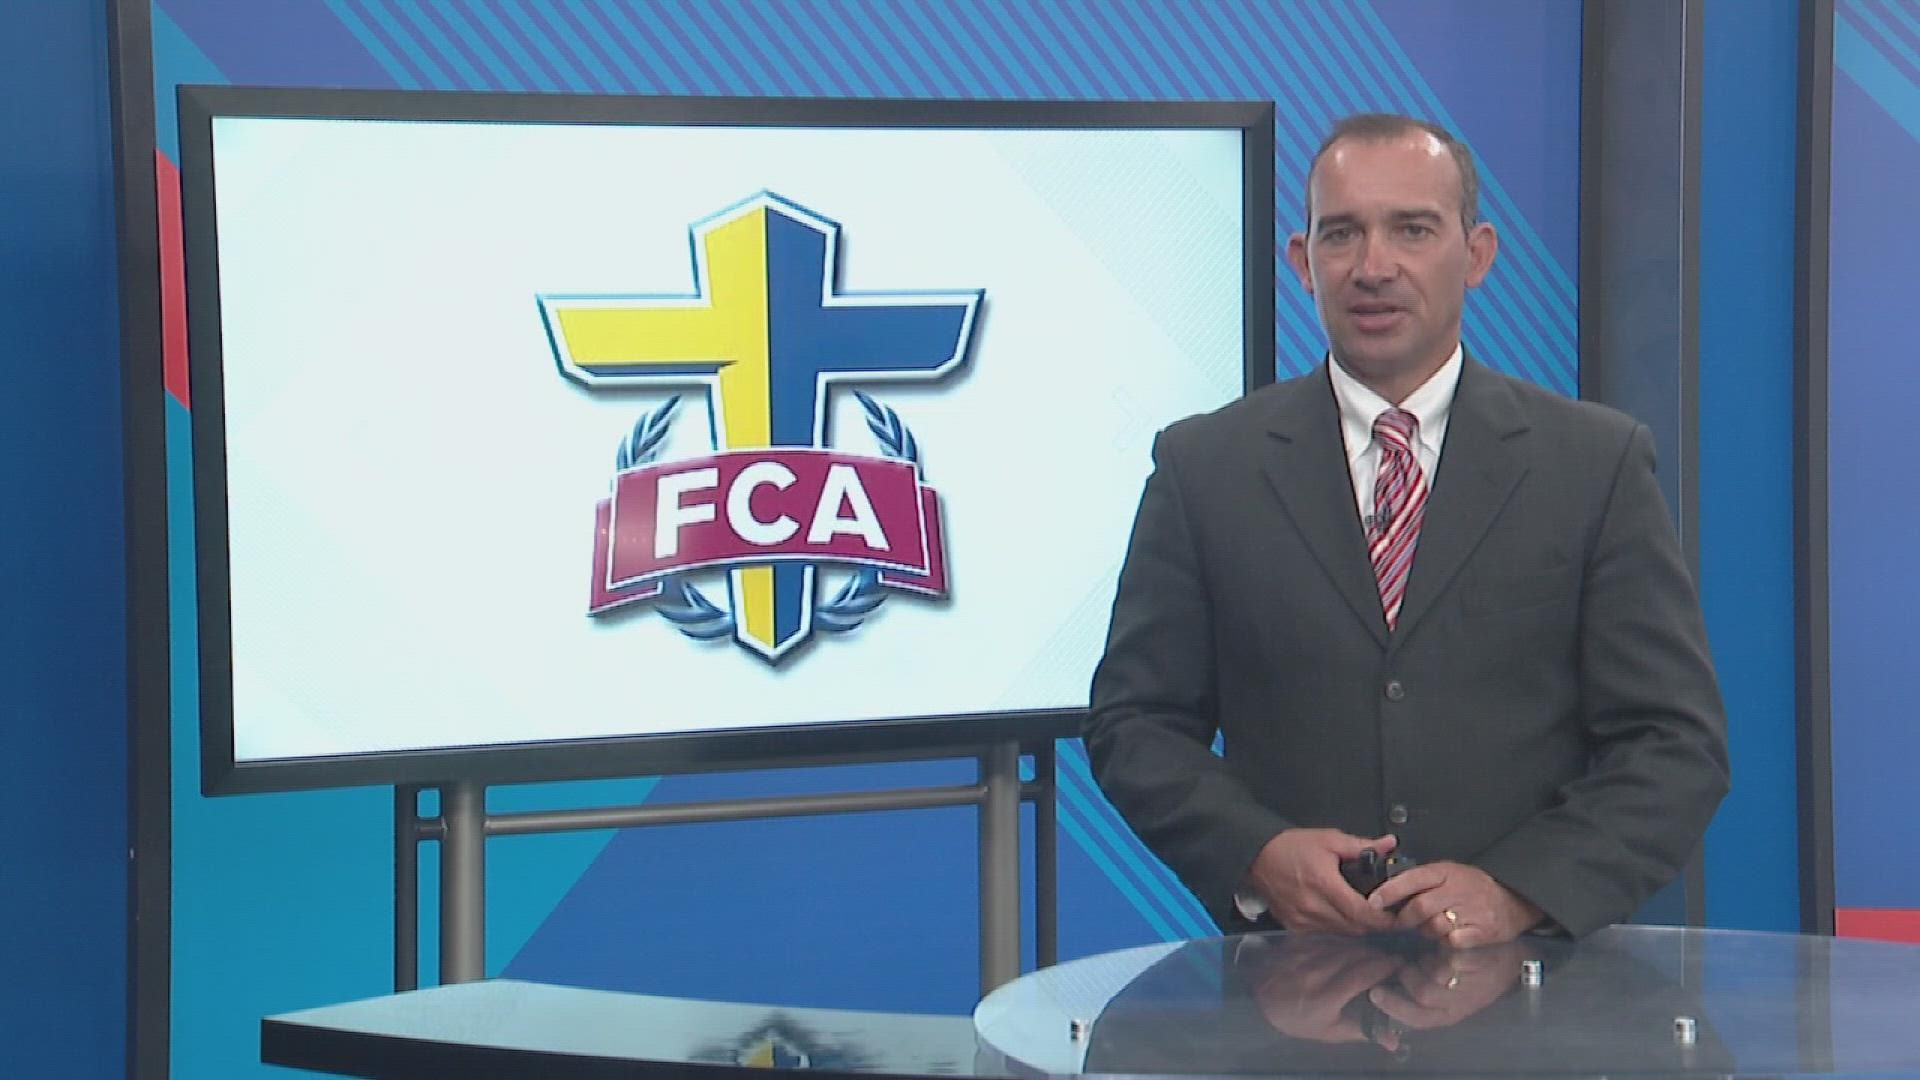 FCA story of the weeks features the Peoria City semi-pro Soccer team.